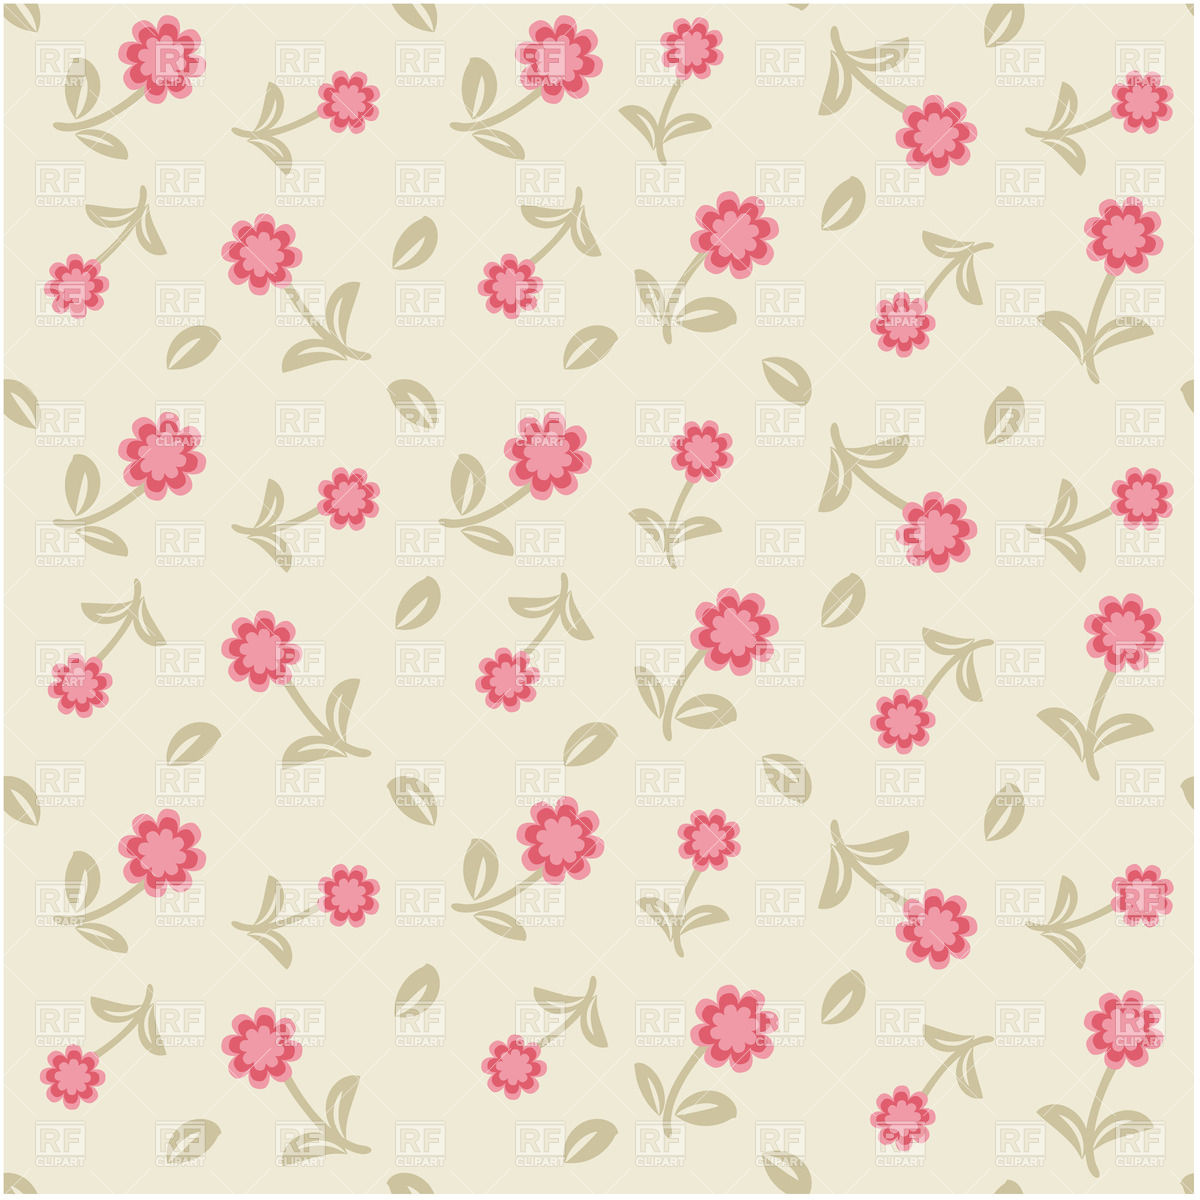 Cute Pastel Floral Seamless Background Background Textures